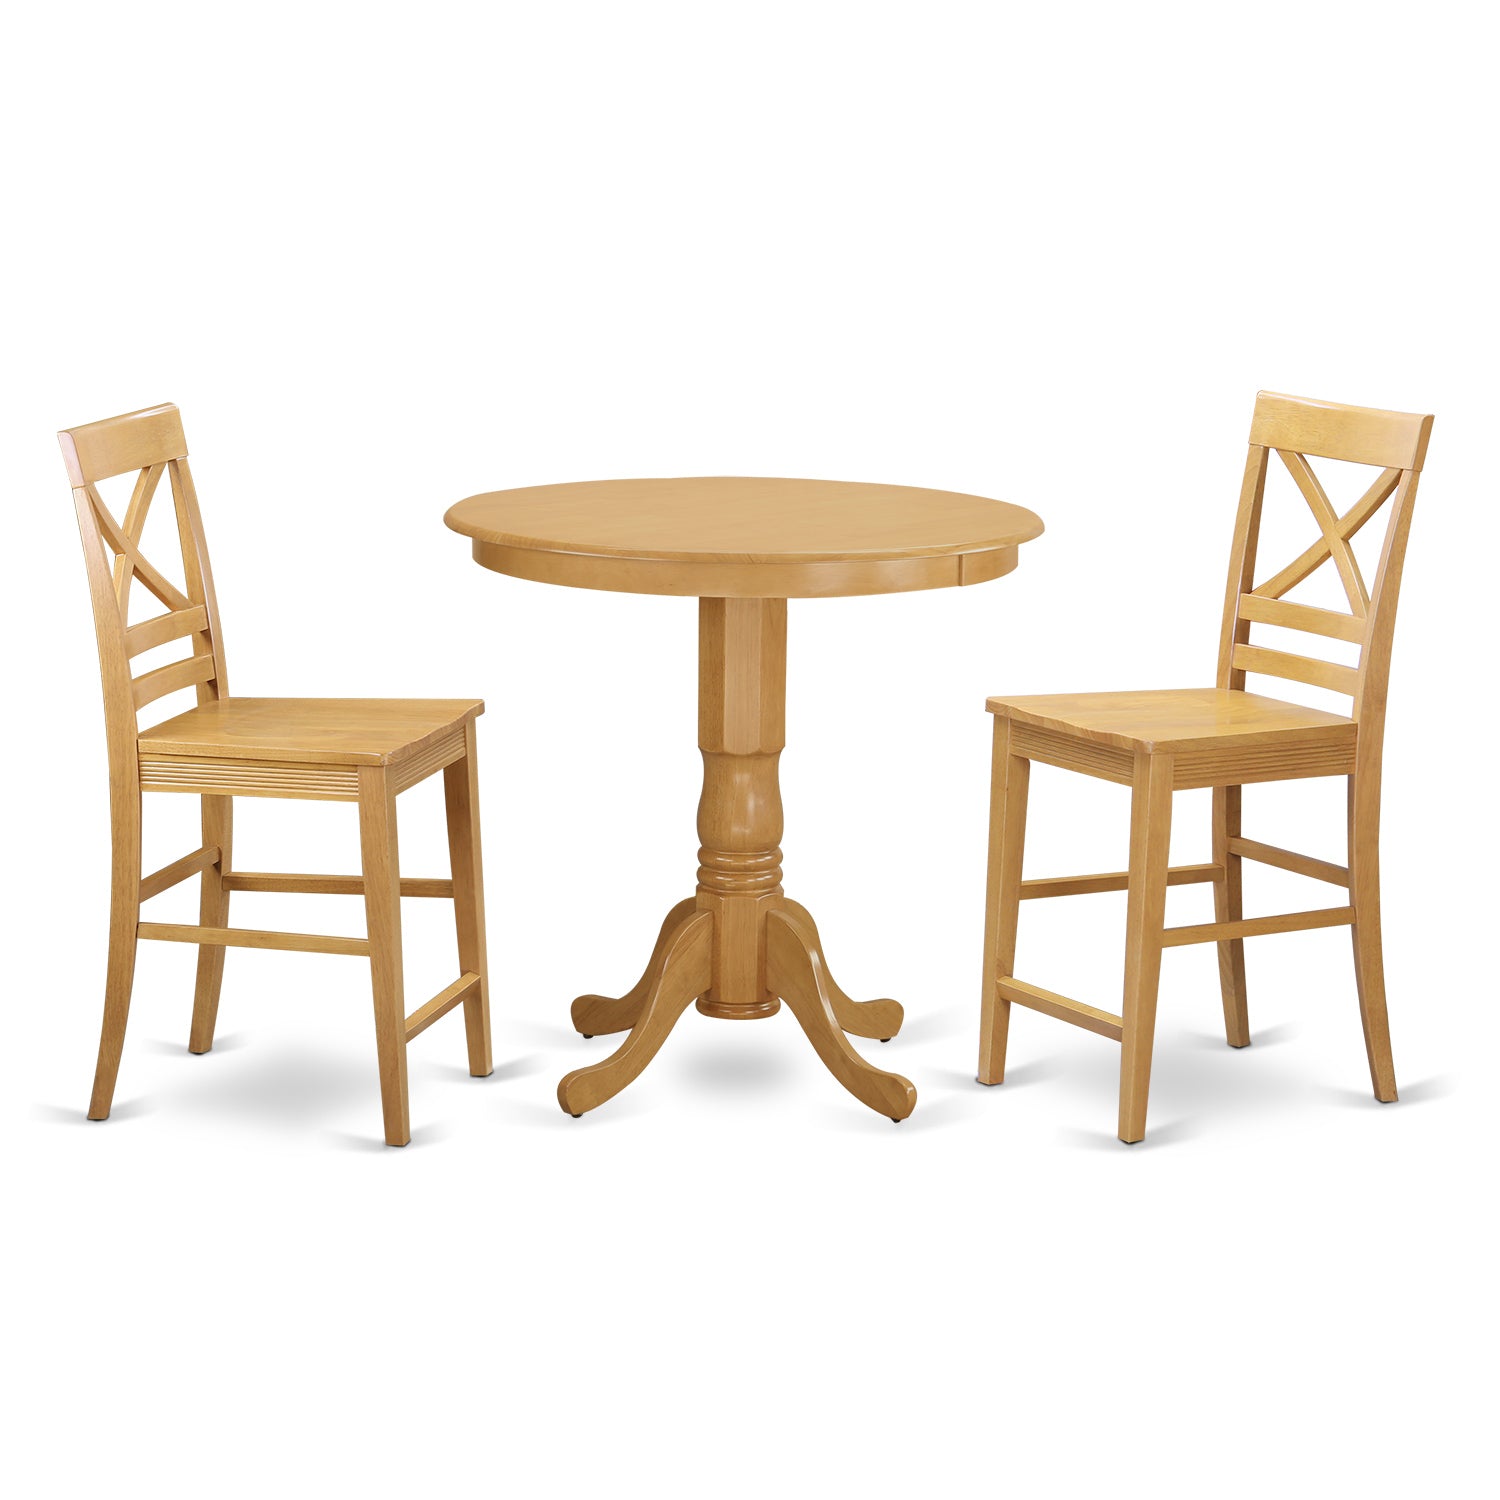 JAQU3-OAK-W 3 Pc counter height Dining room set - high Table and 2 counter height stool.